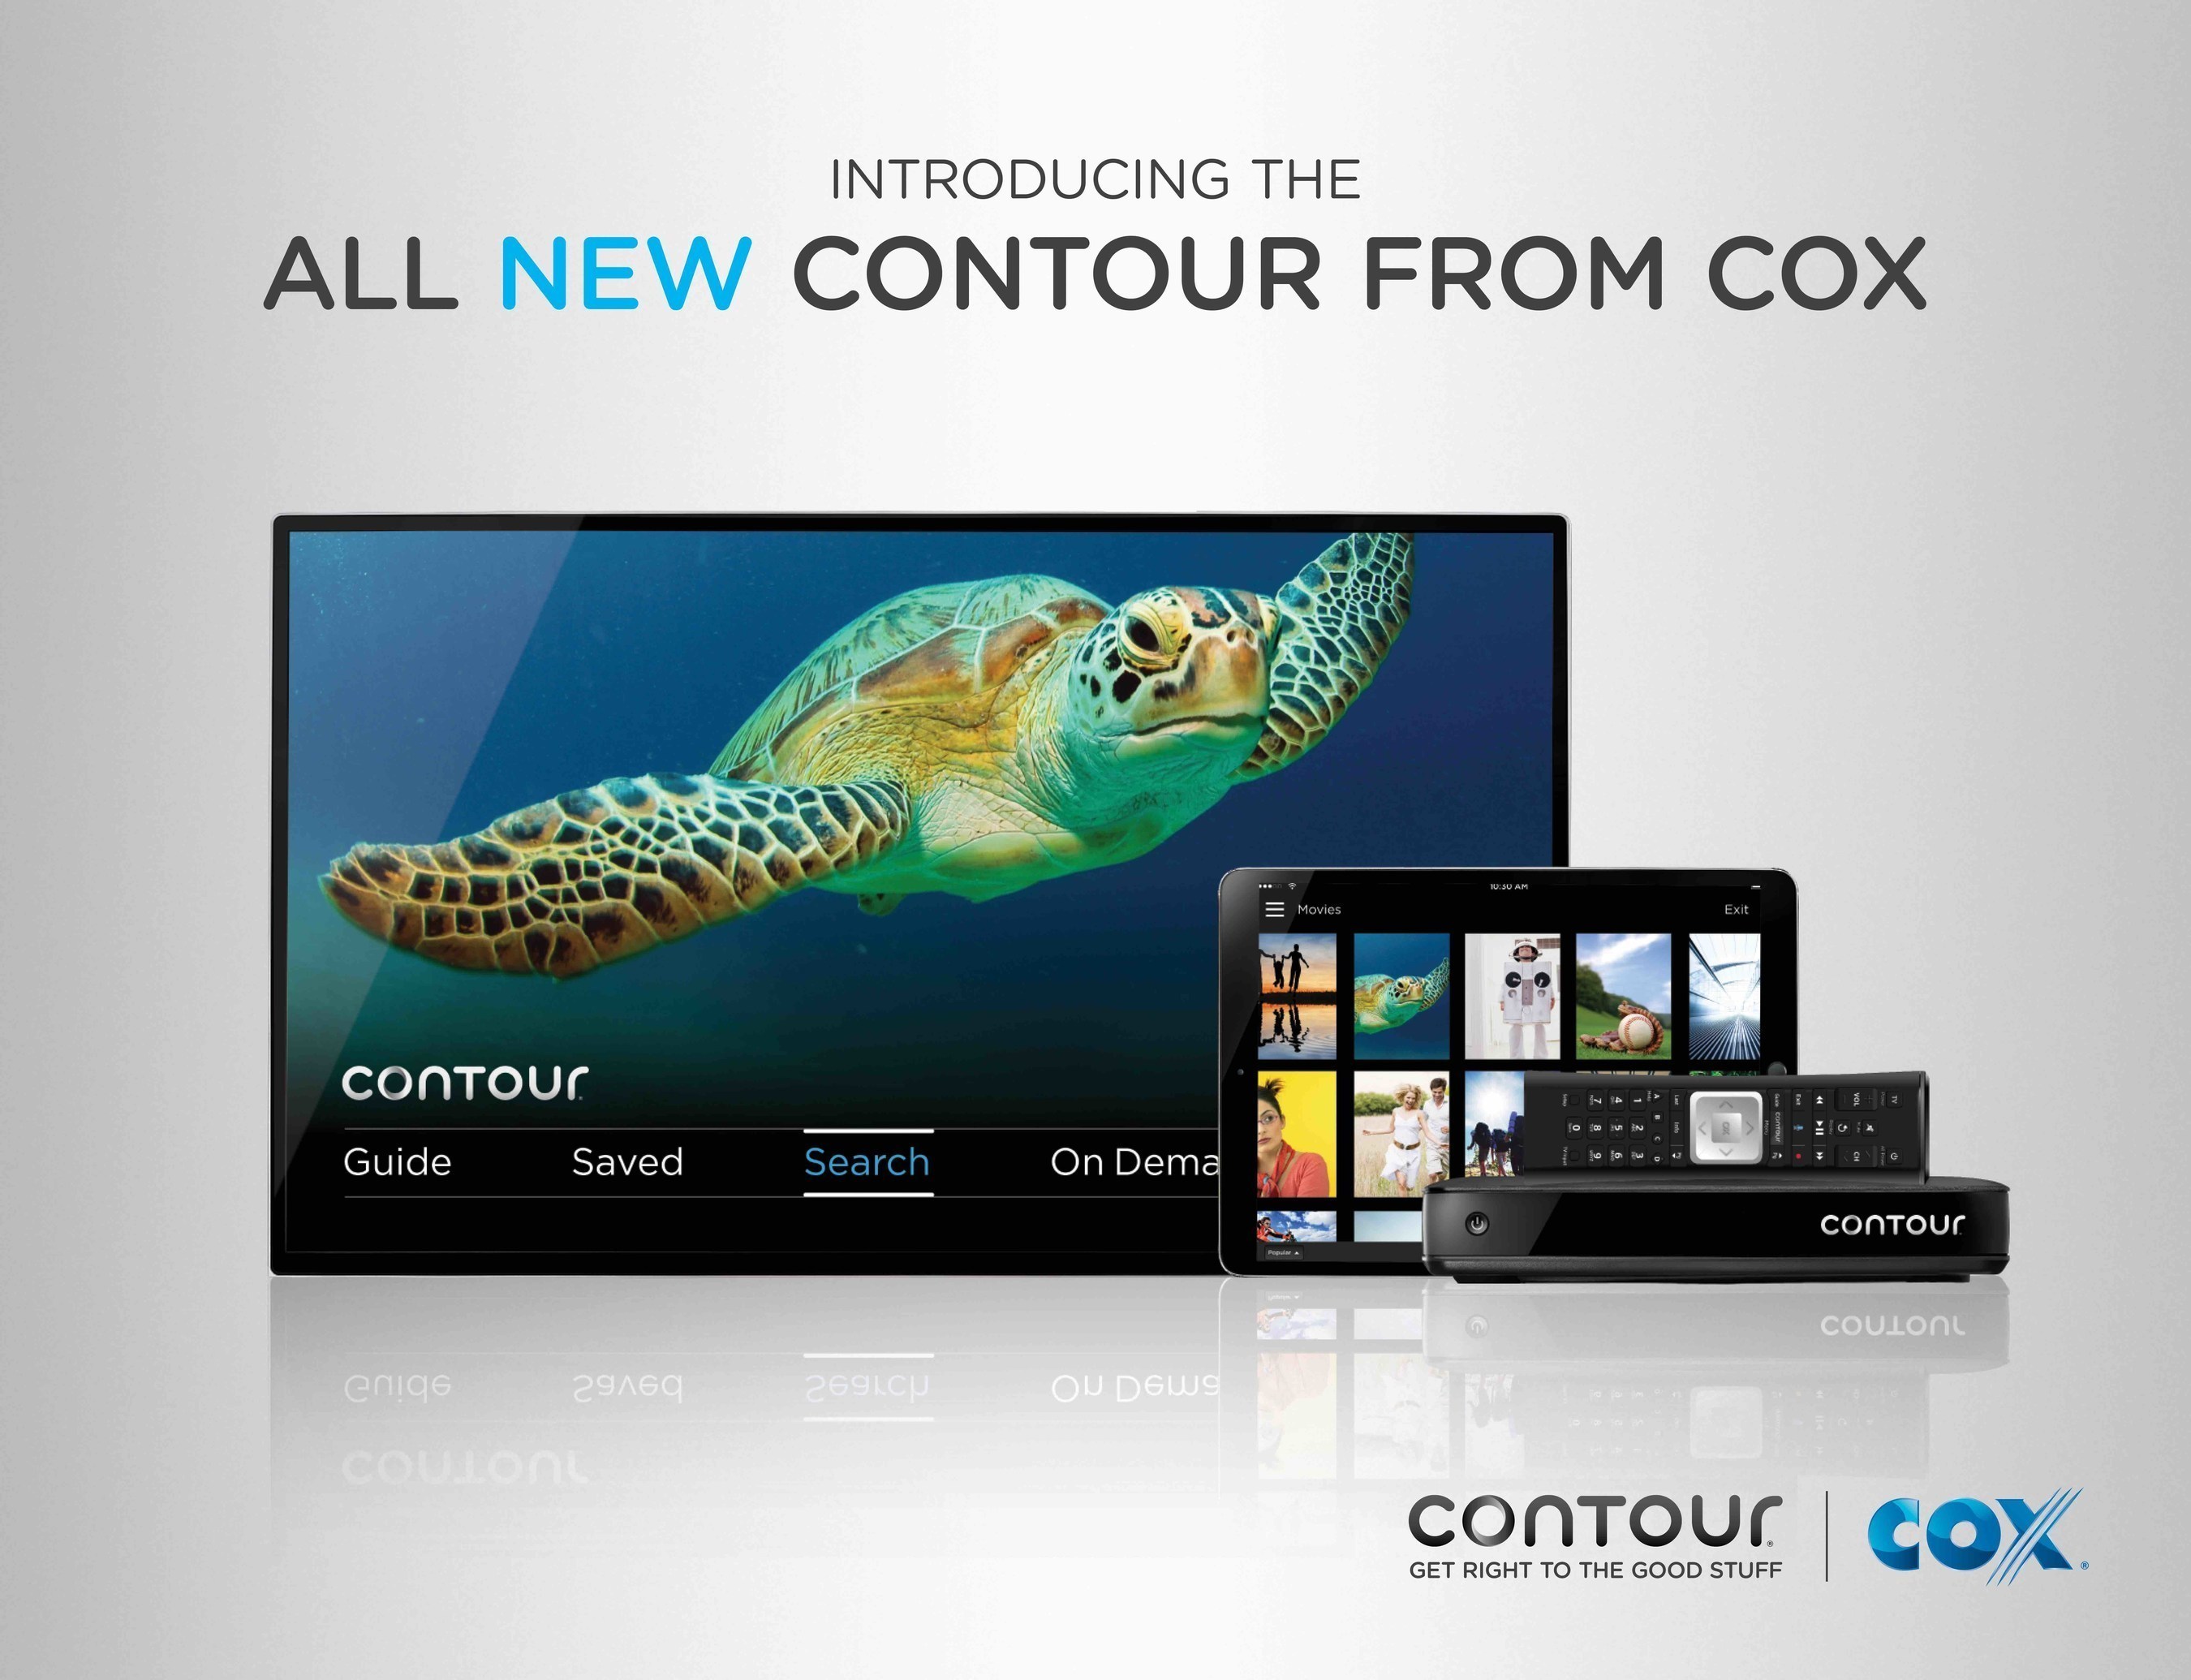 All New Contour from Cox